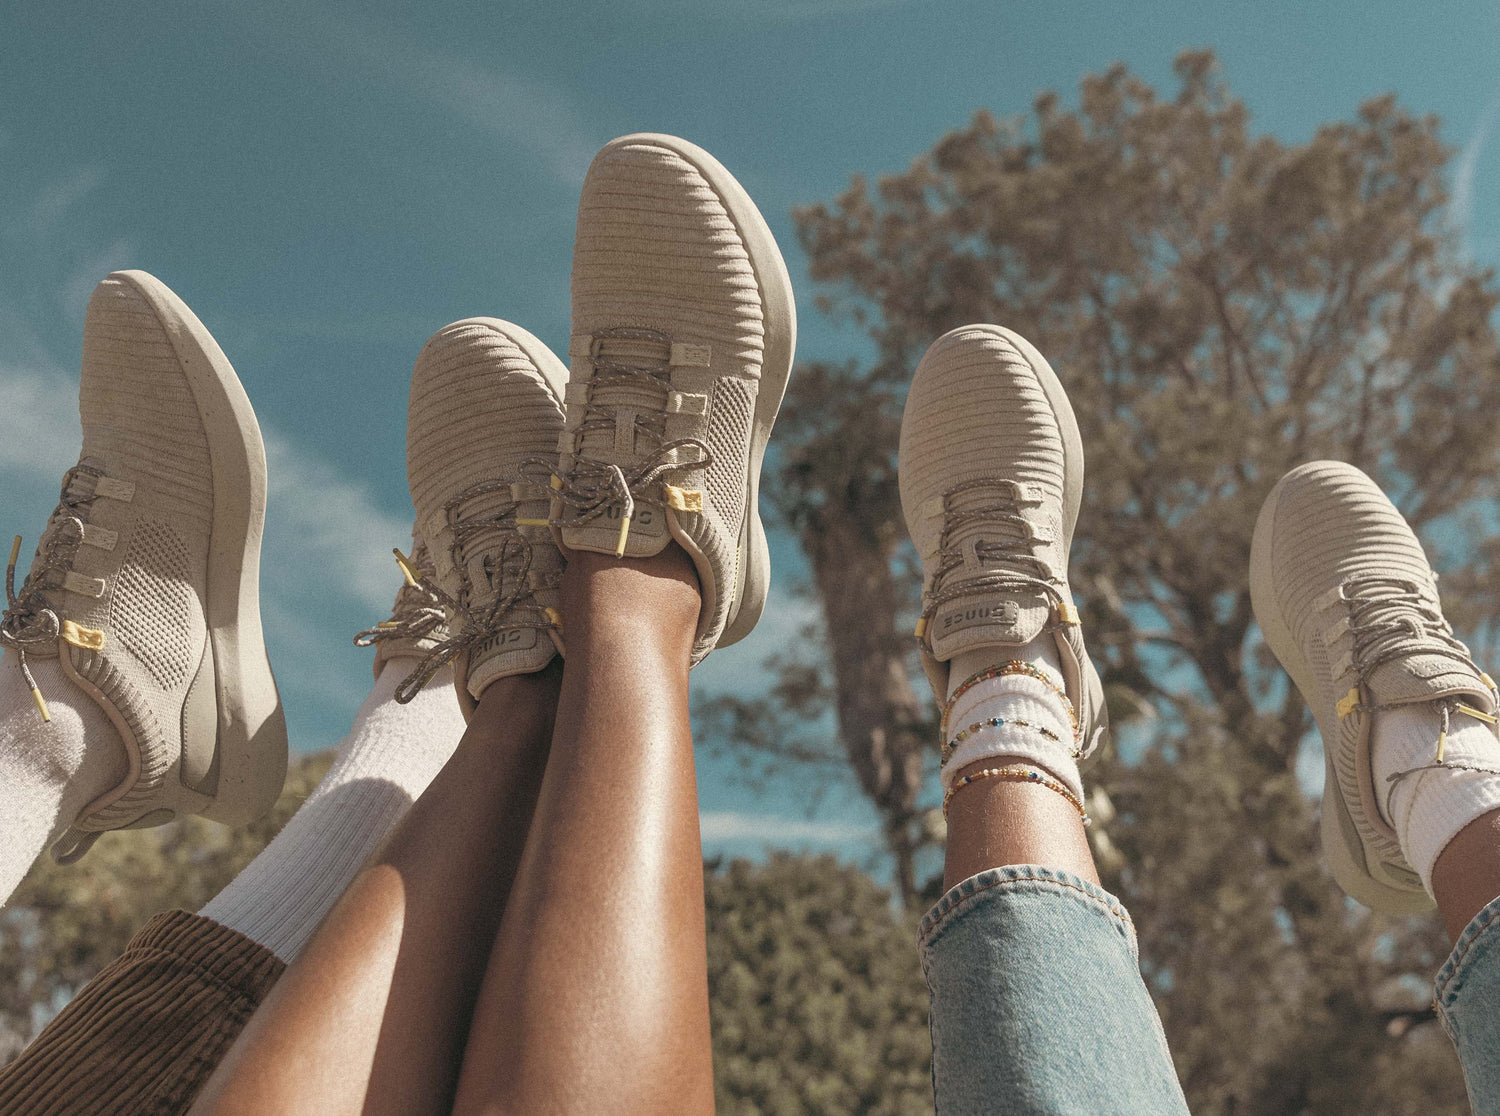 Close-up shot of three people's feet up in the air wearing SNNCE Tabi sneakers shown against the blue sky